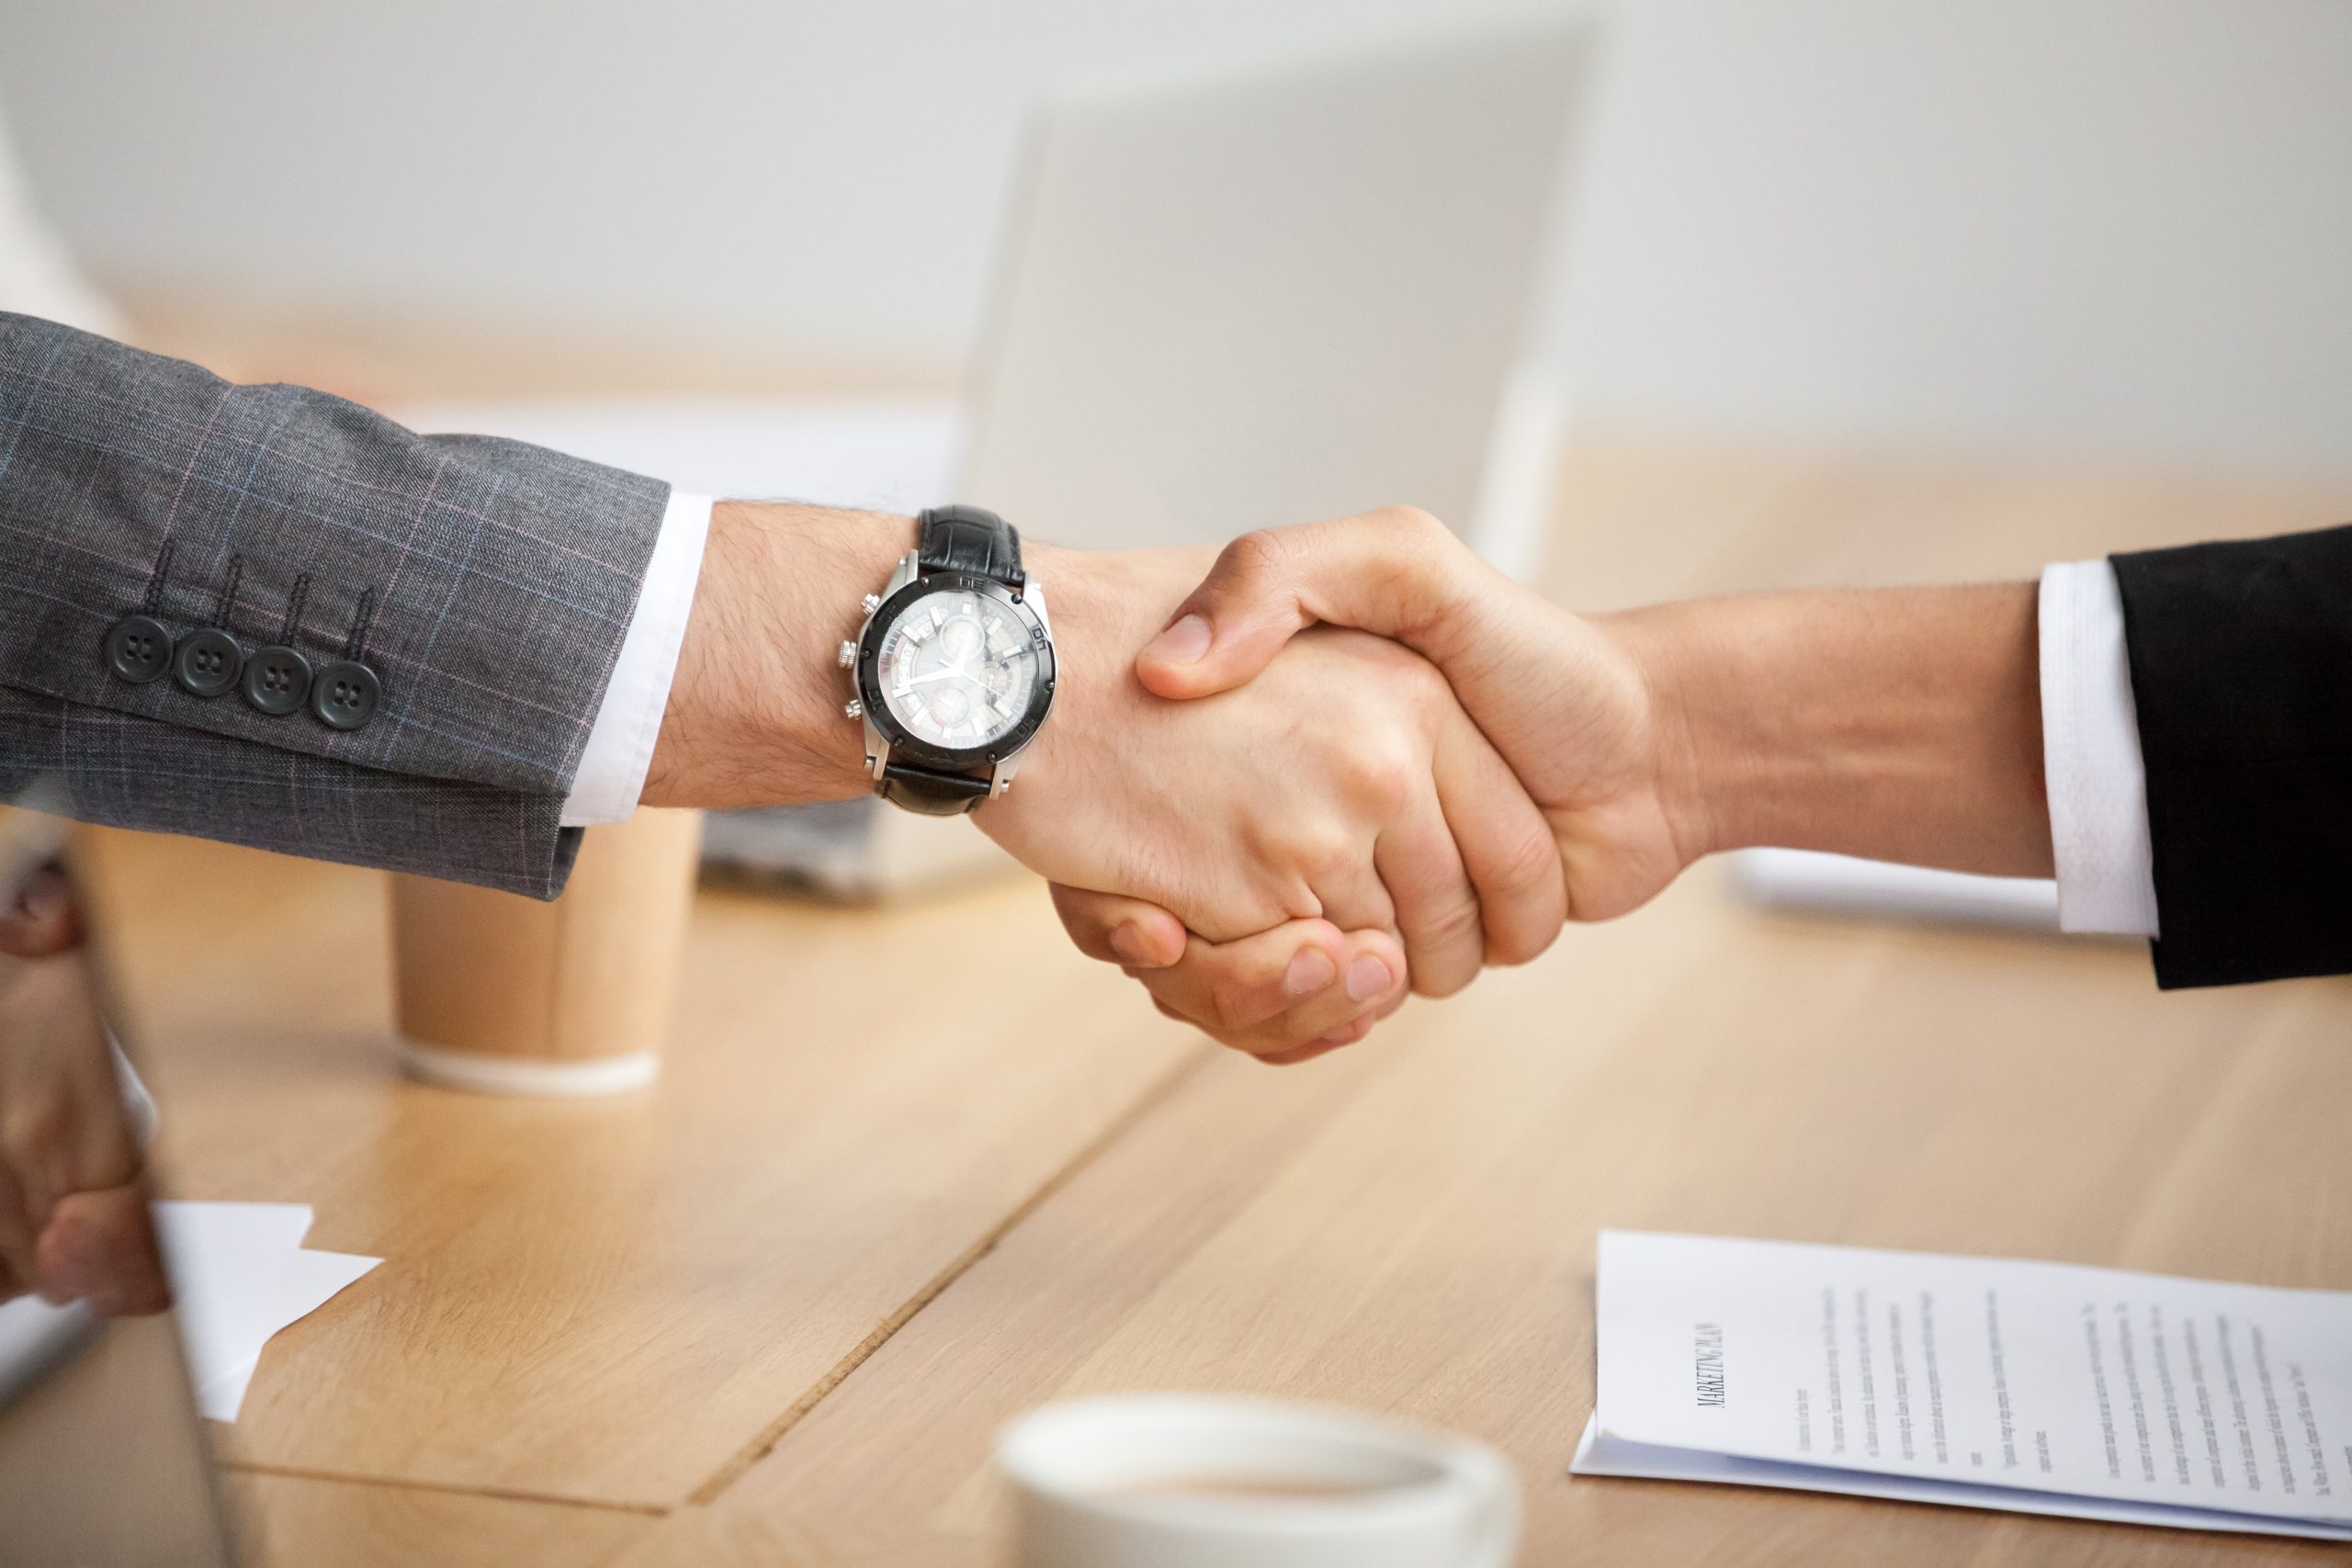 https://brushpic.com/wp-content/uploads/2022/07/closeup-view-handshake-two-businessmen-suits-shaking-hands-scaled.jpg